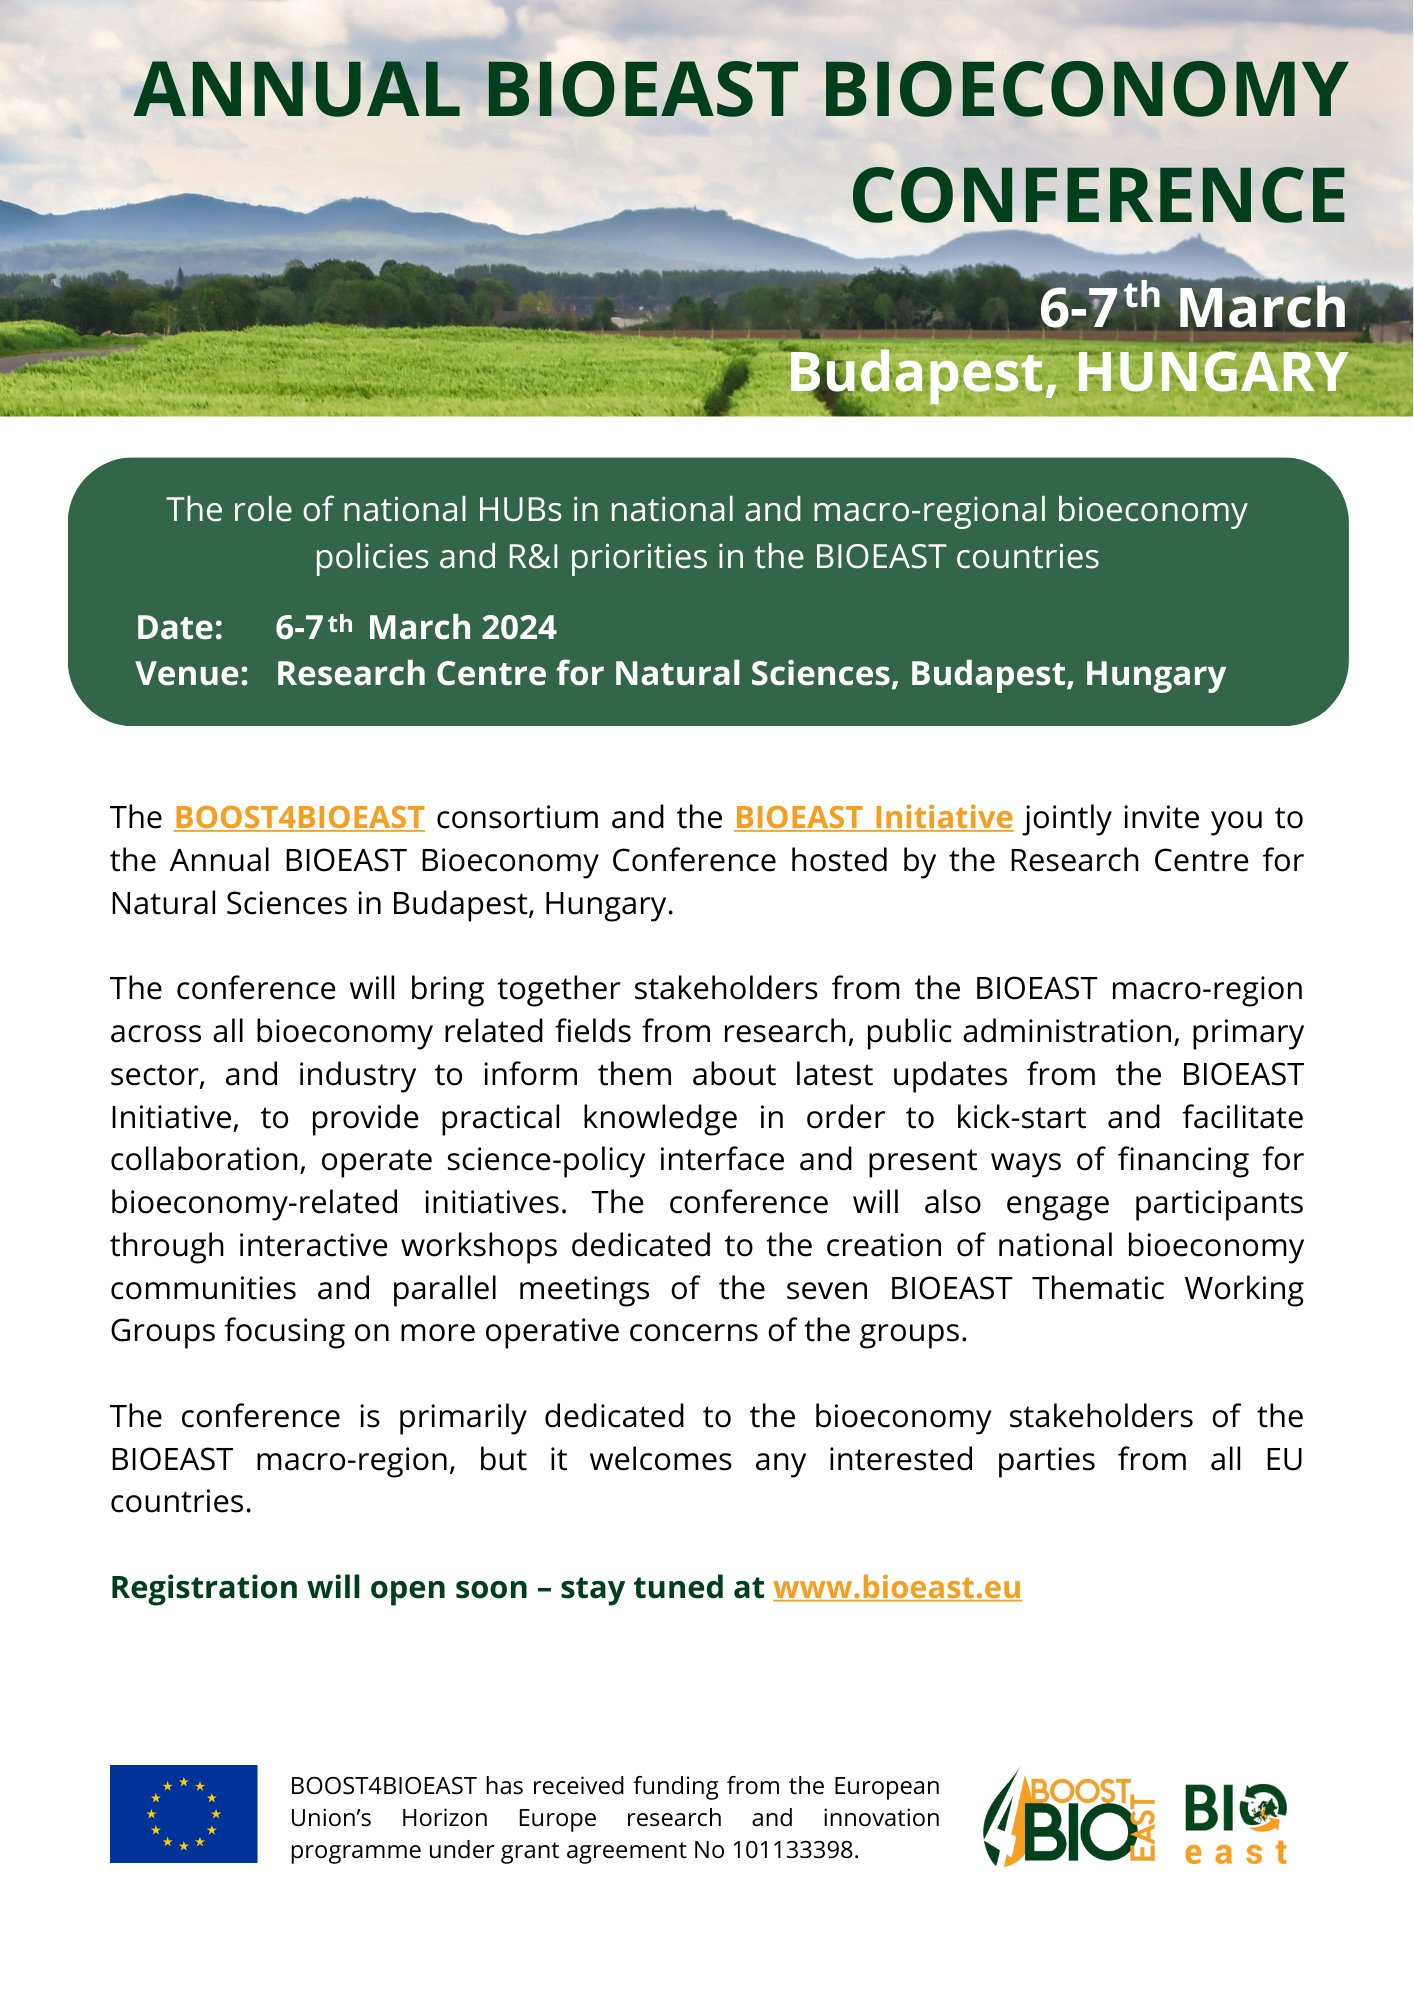 The BOOST4BIOEAST consortium and the BIOEAST Initiative jointly invite you to the Annual BIOEAST Bioeconomy Conference hosted by the Research Centre for Natural Sciences in Budapest, Hungary. The  (2)